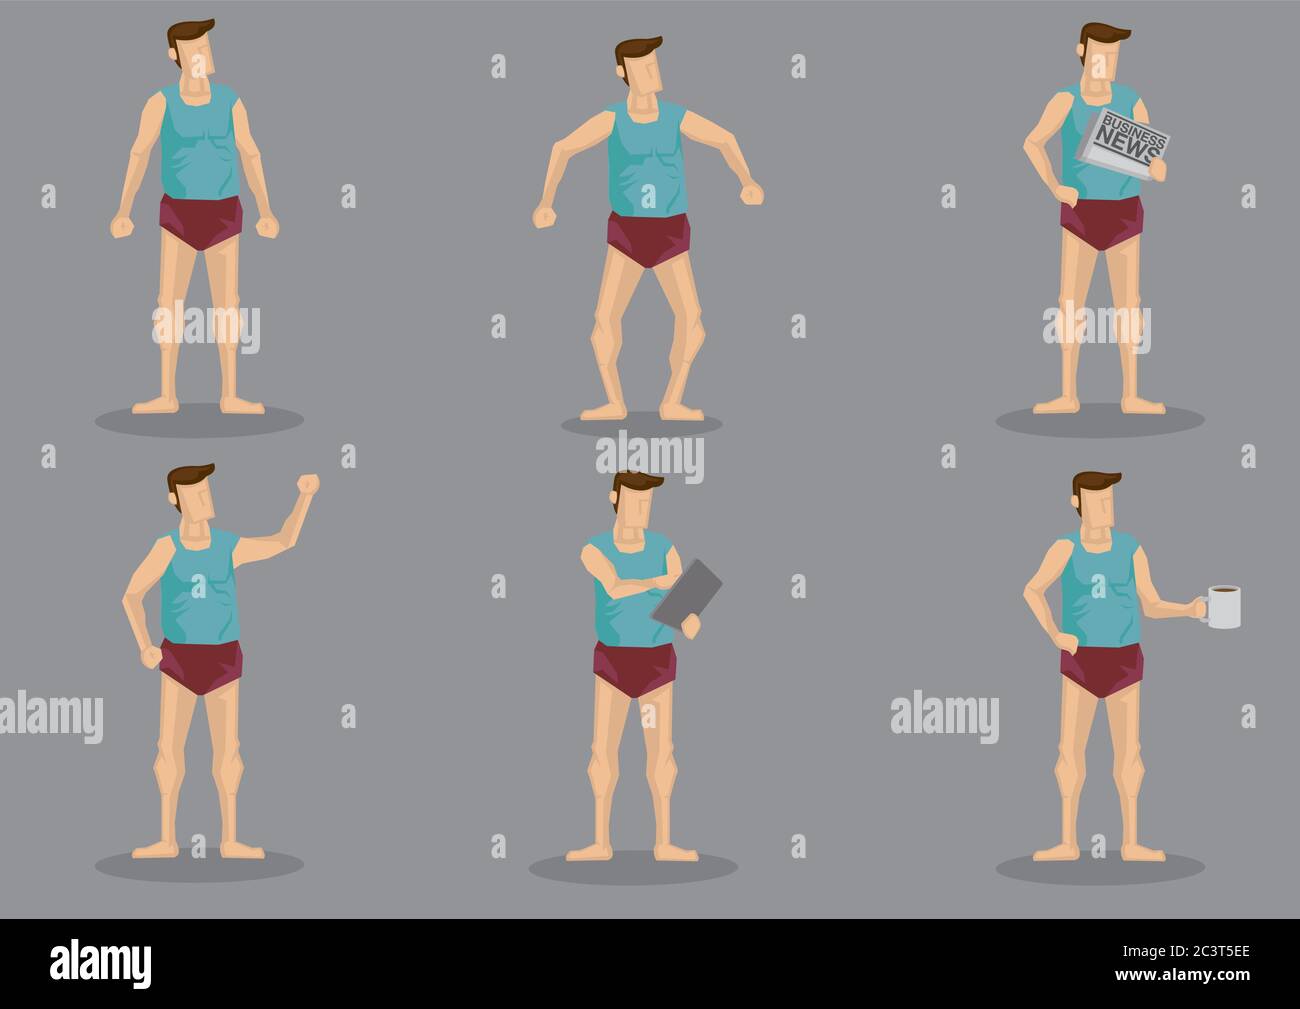 Set of six vector illustrations of barefooted cartoon man wearing sleeves top and shorts in various relaxed gestures isolated on grey background. Stock Vector